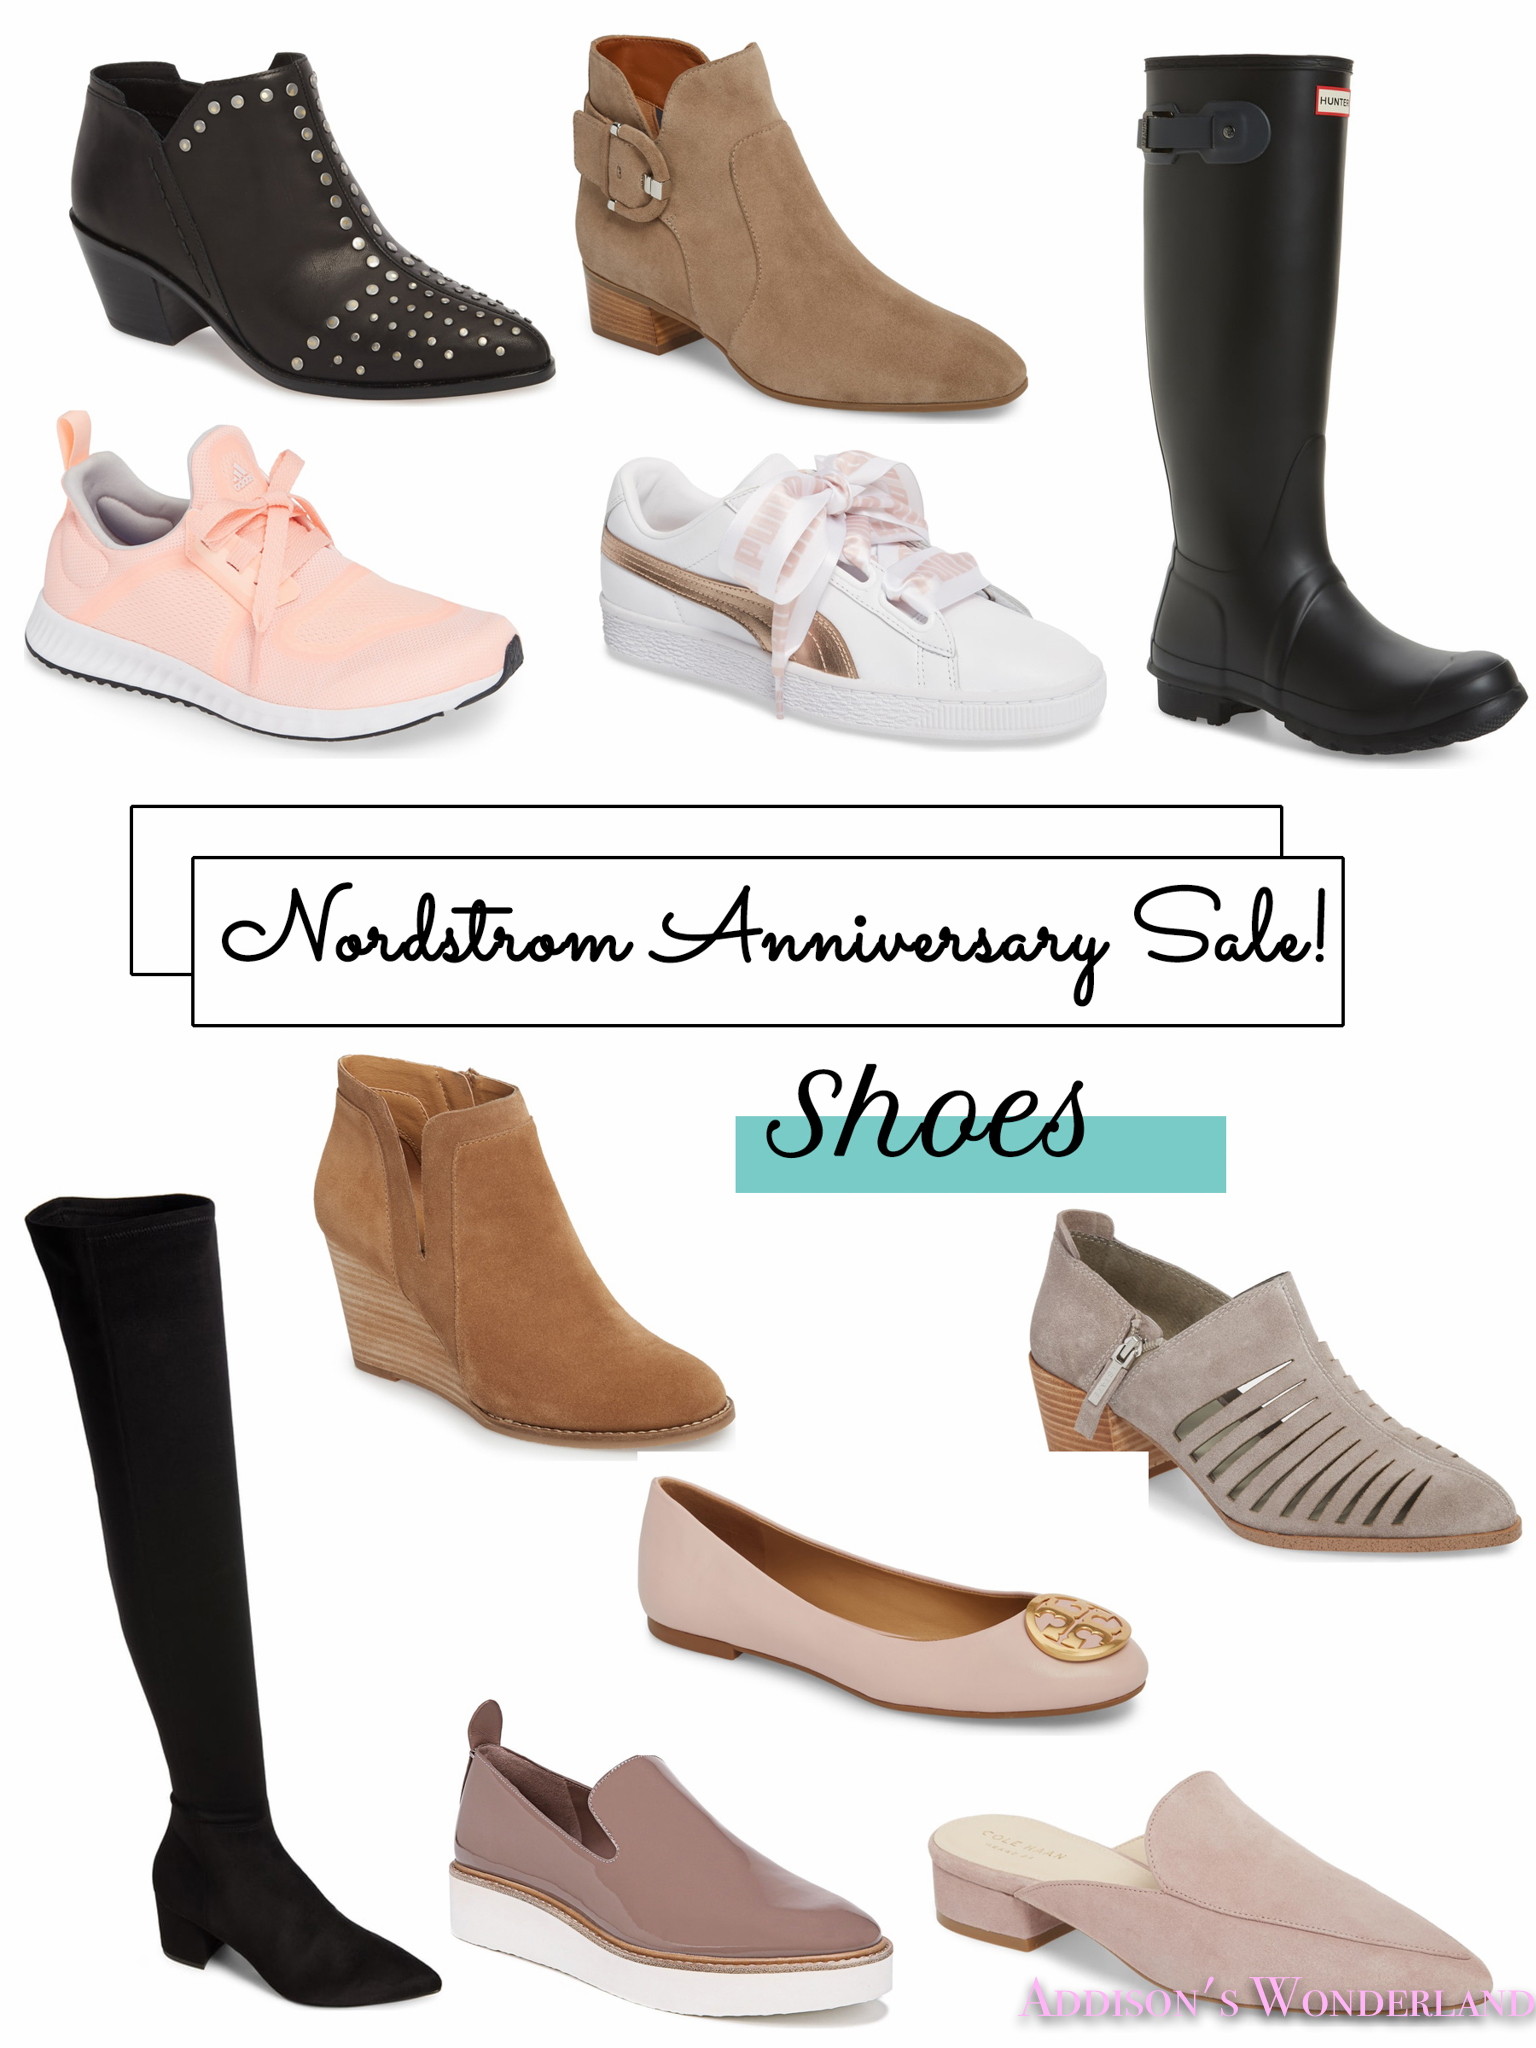 My Top Picks for the Nordstrom Anniversary Sale!